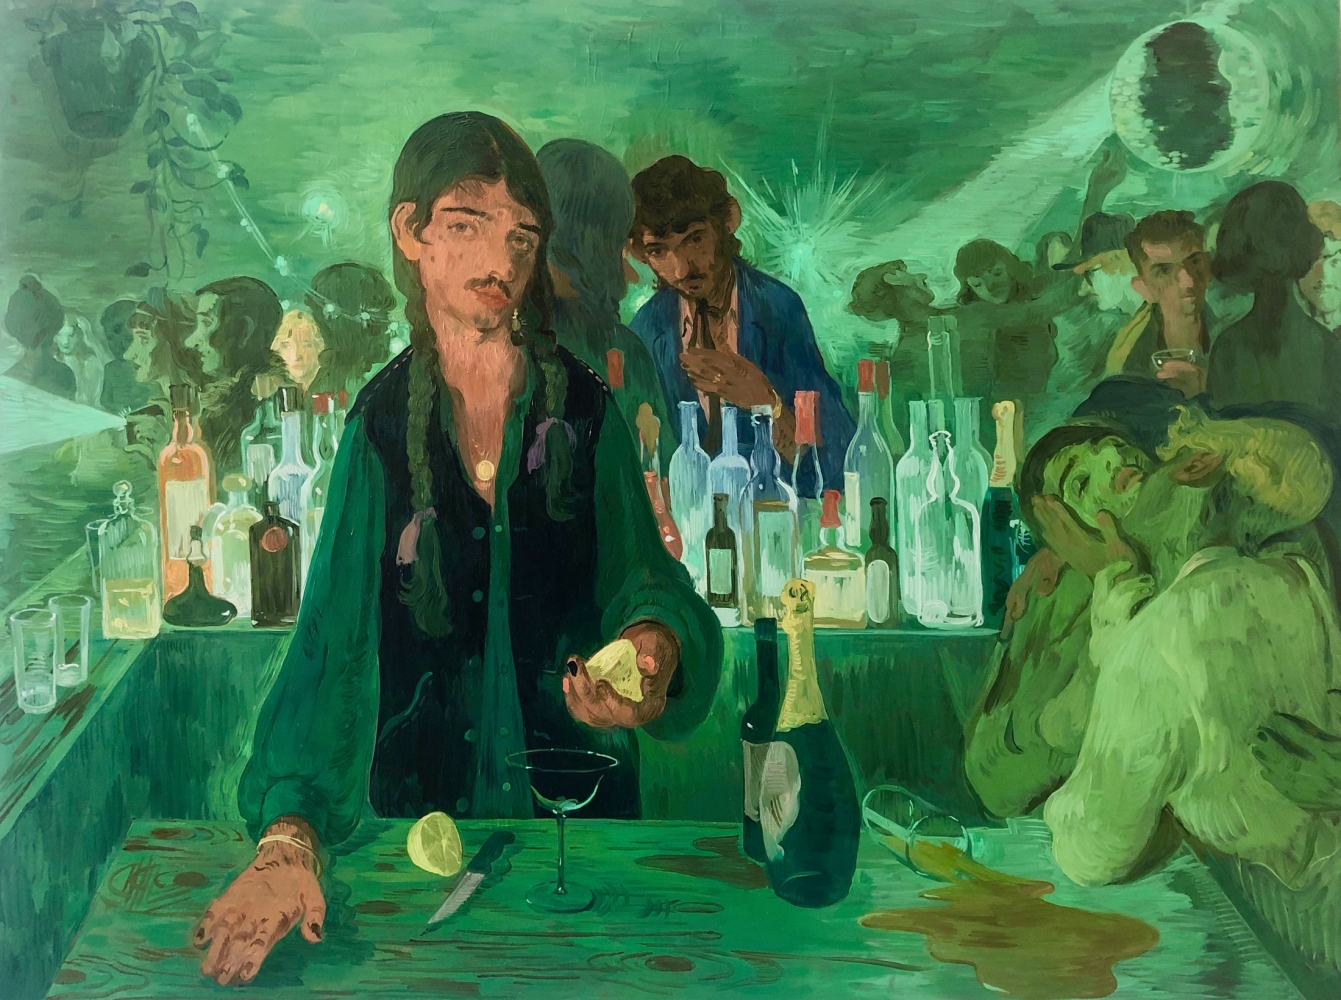 Salman Toor
The Bar on East 13th, 2019
Oil on panel
36 x 48 inches
(91.4 x 121.9 cm)